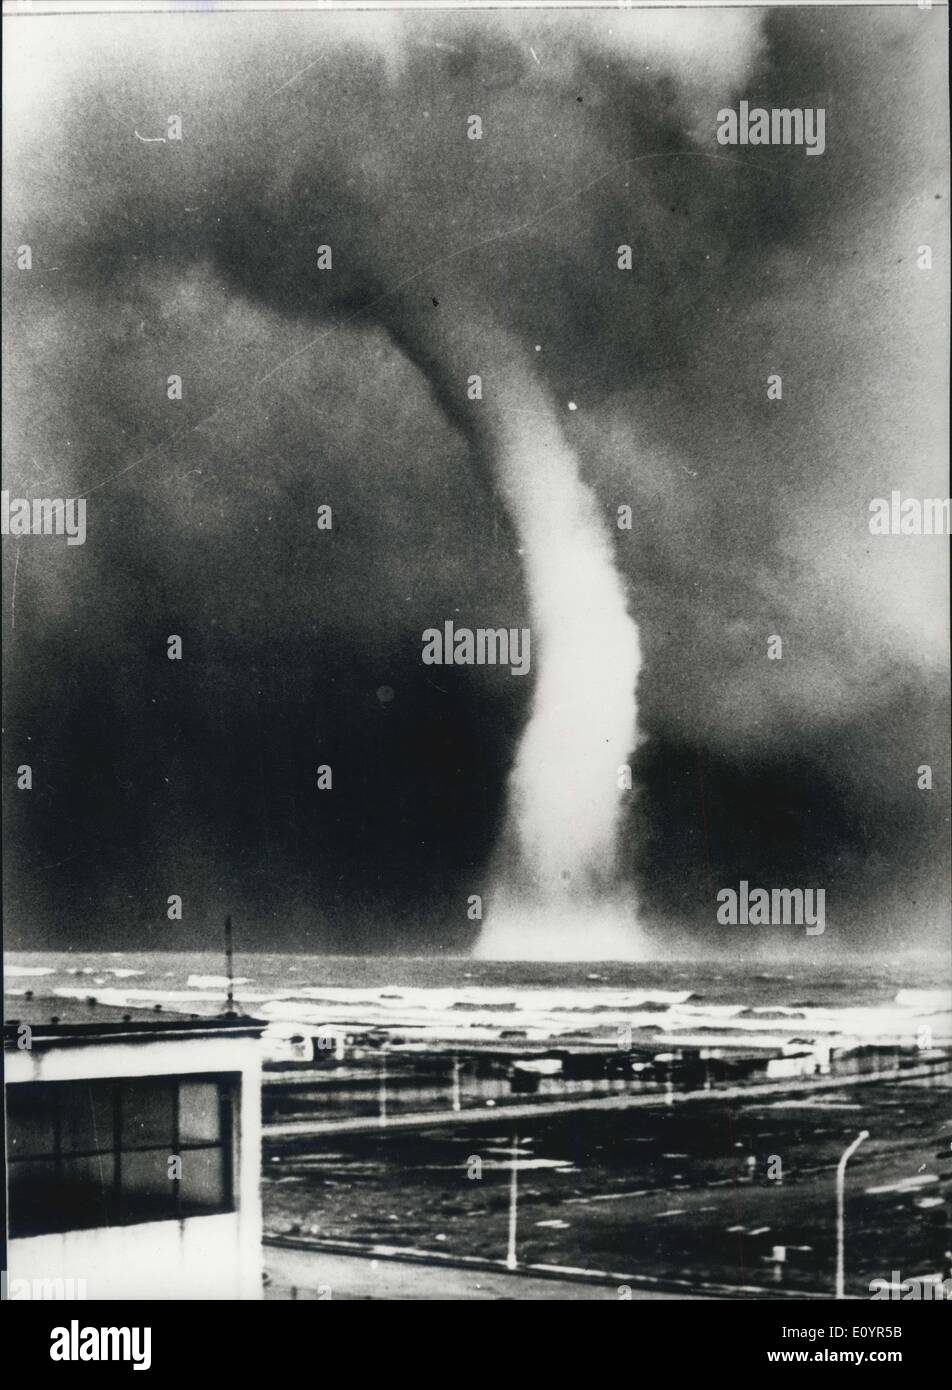 Mar. 15, 1971 - Impressive Picture Of Tornado: This impressive picture of the gigantic tornado of the sea, was taken off the coast of Malaga, Spain. The water reached a height of 500 metres and the photographs was taken by an amateur, Mariano Nubio Croi, of Malaga. Stock Photo